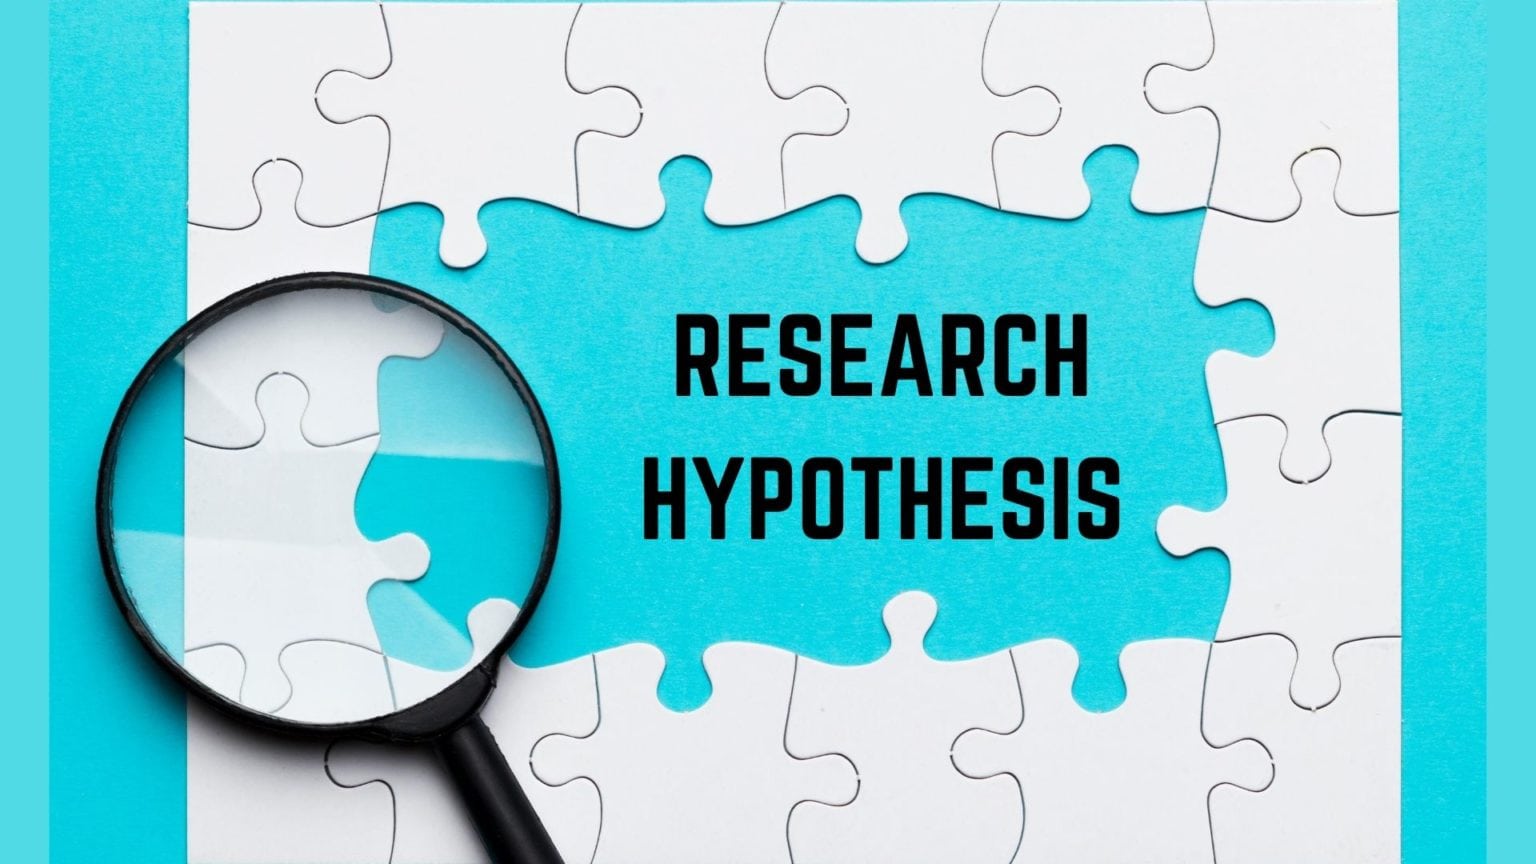 what are the research hypothesis